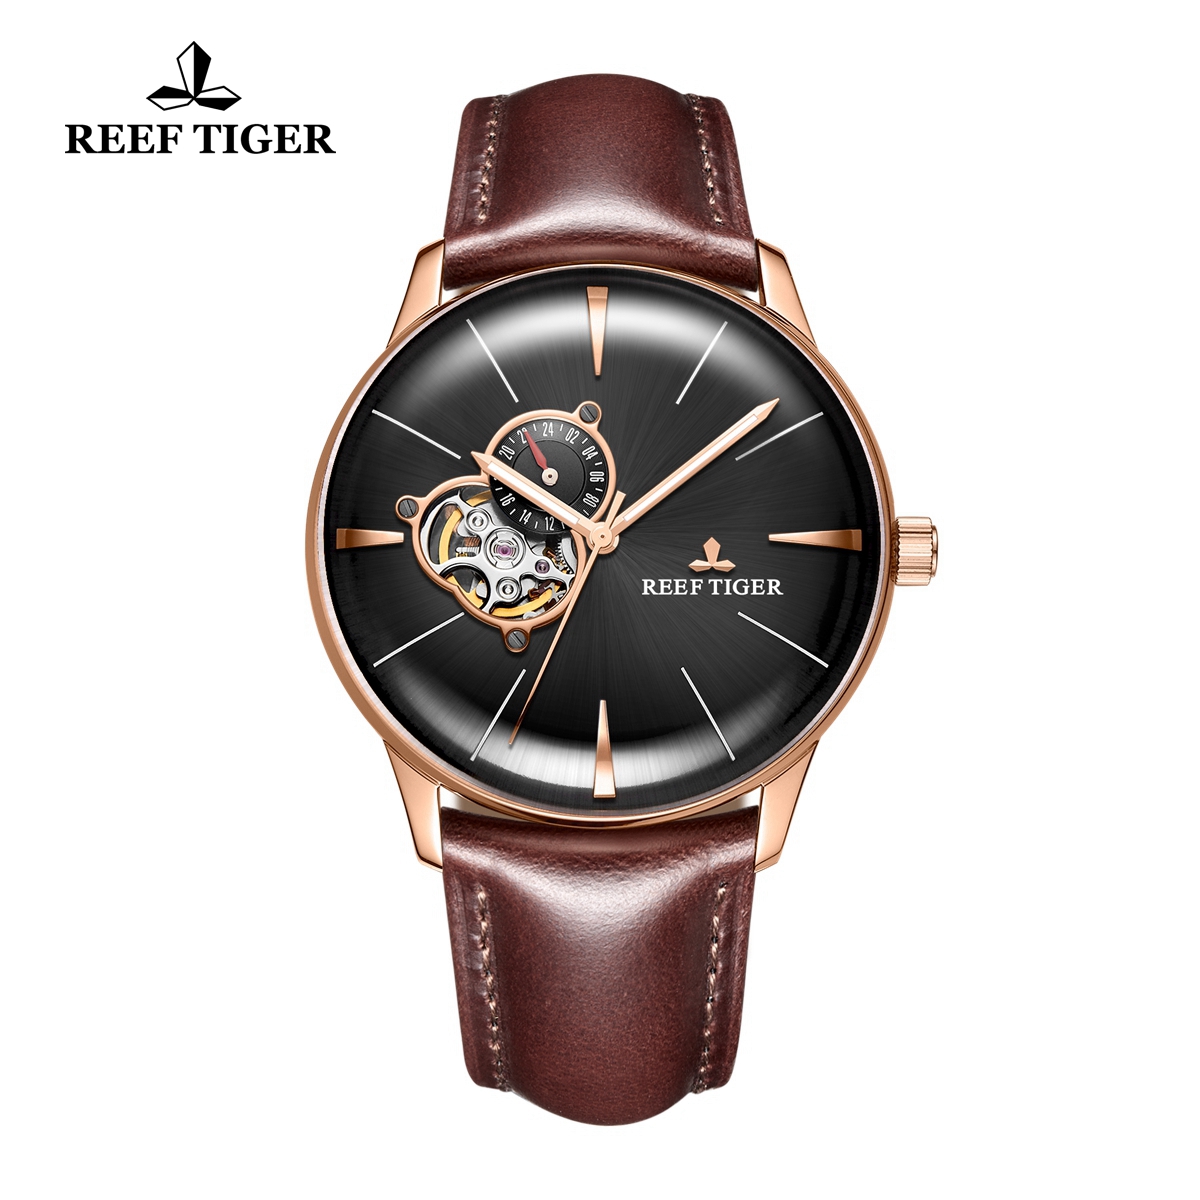 Reef Tiger Classic Glory Men's Automatic Watch Black Dial Leather Strap RGA8239-PBBH